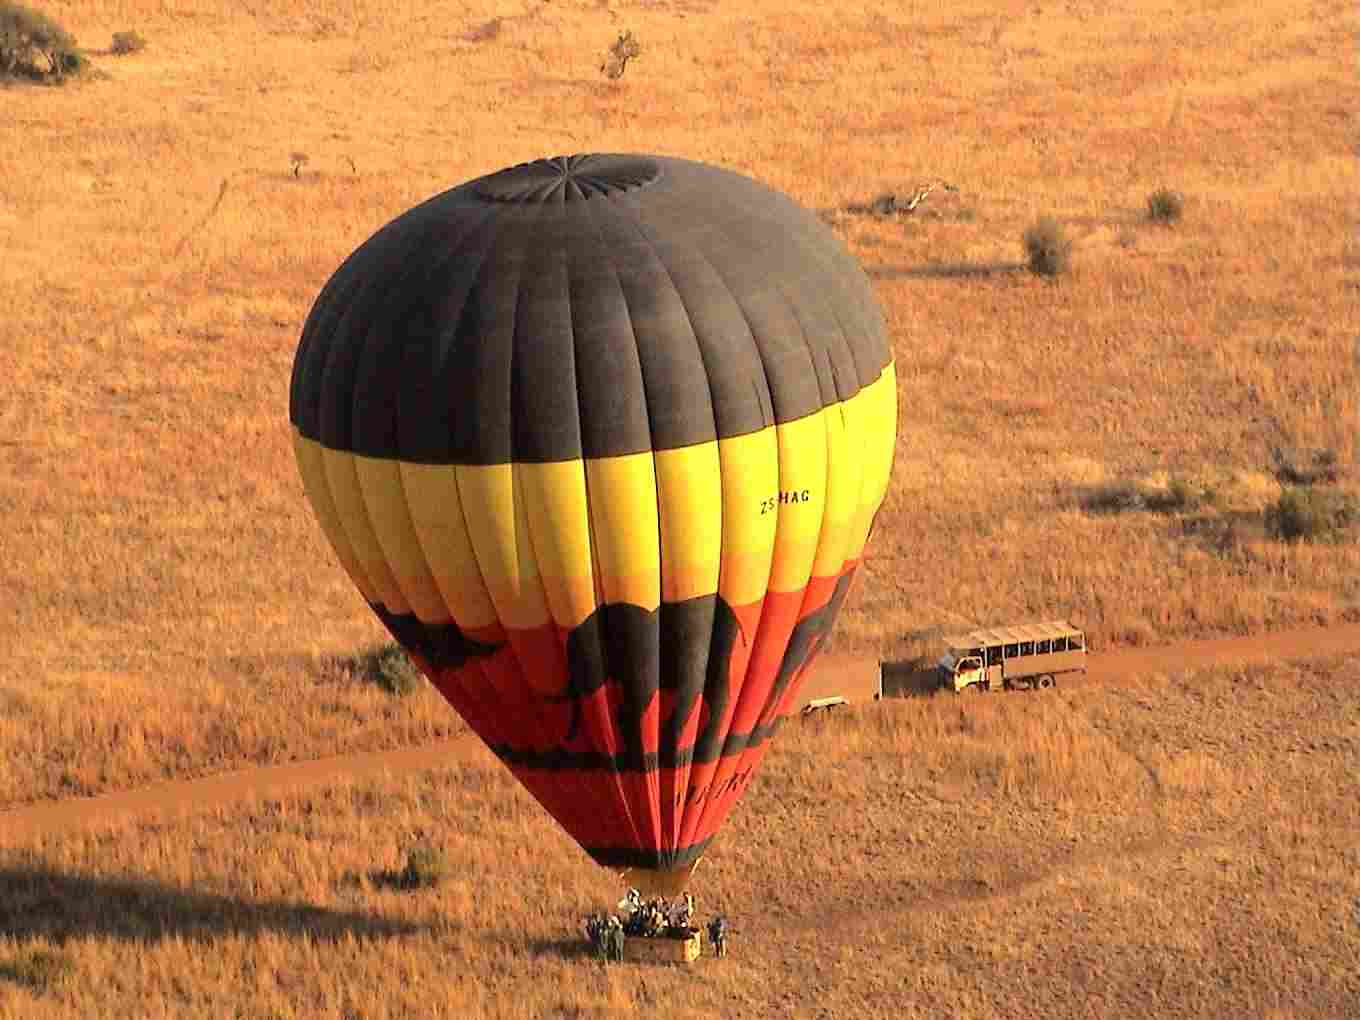 The other balloon lands before we do